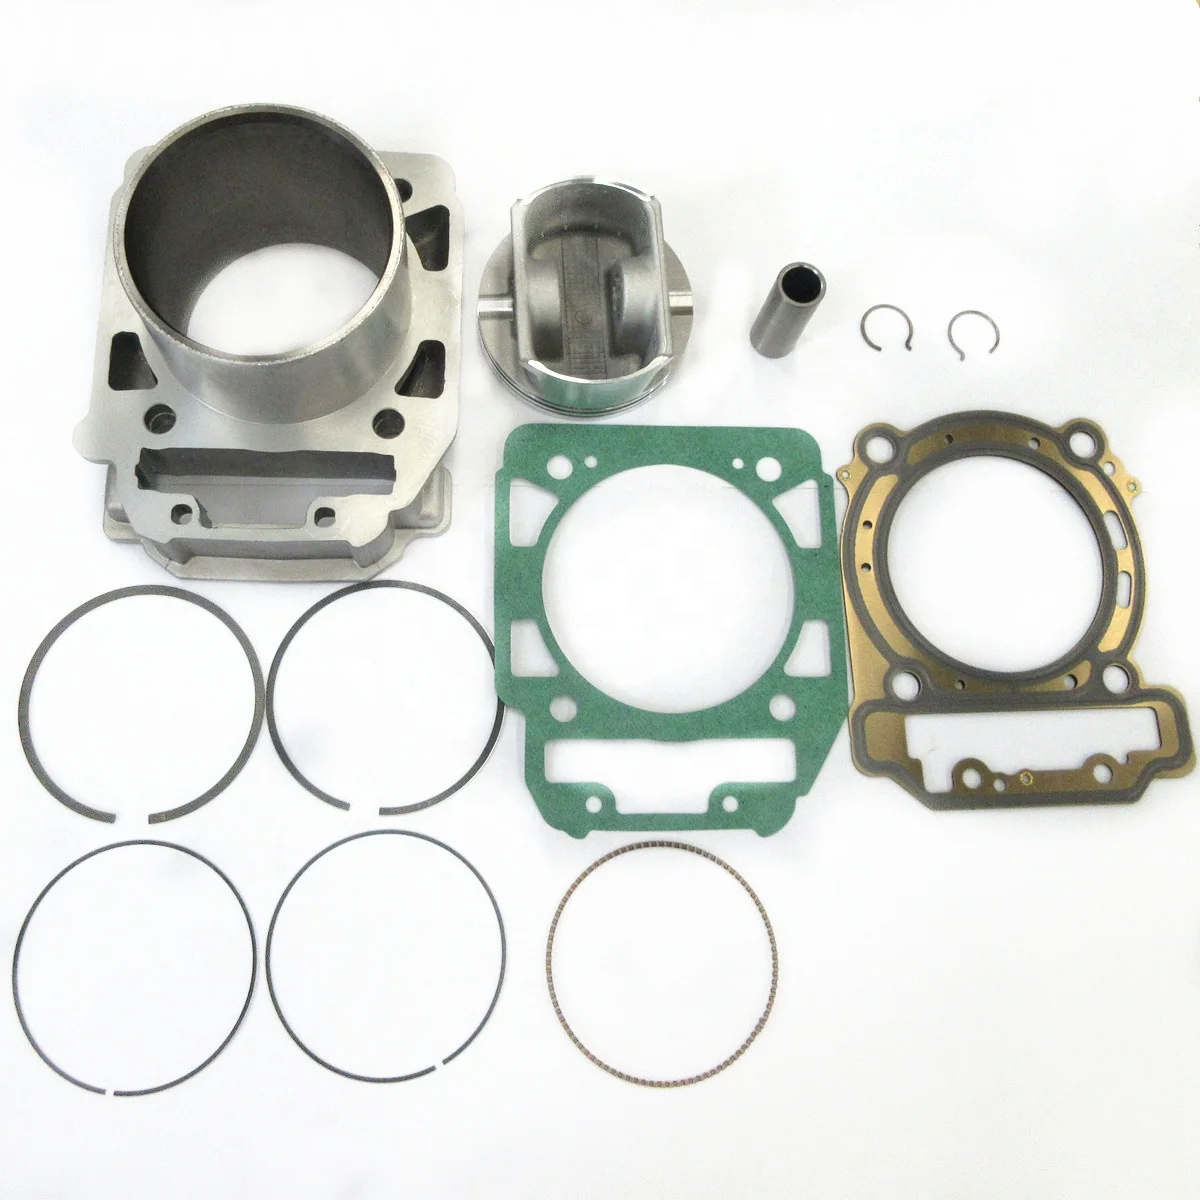 

BRP can-am Cylinder kit 420413430 fit for Renegade 800 2007-2015, Picture shown